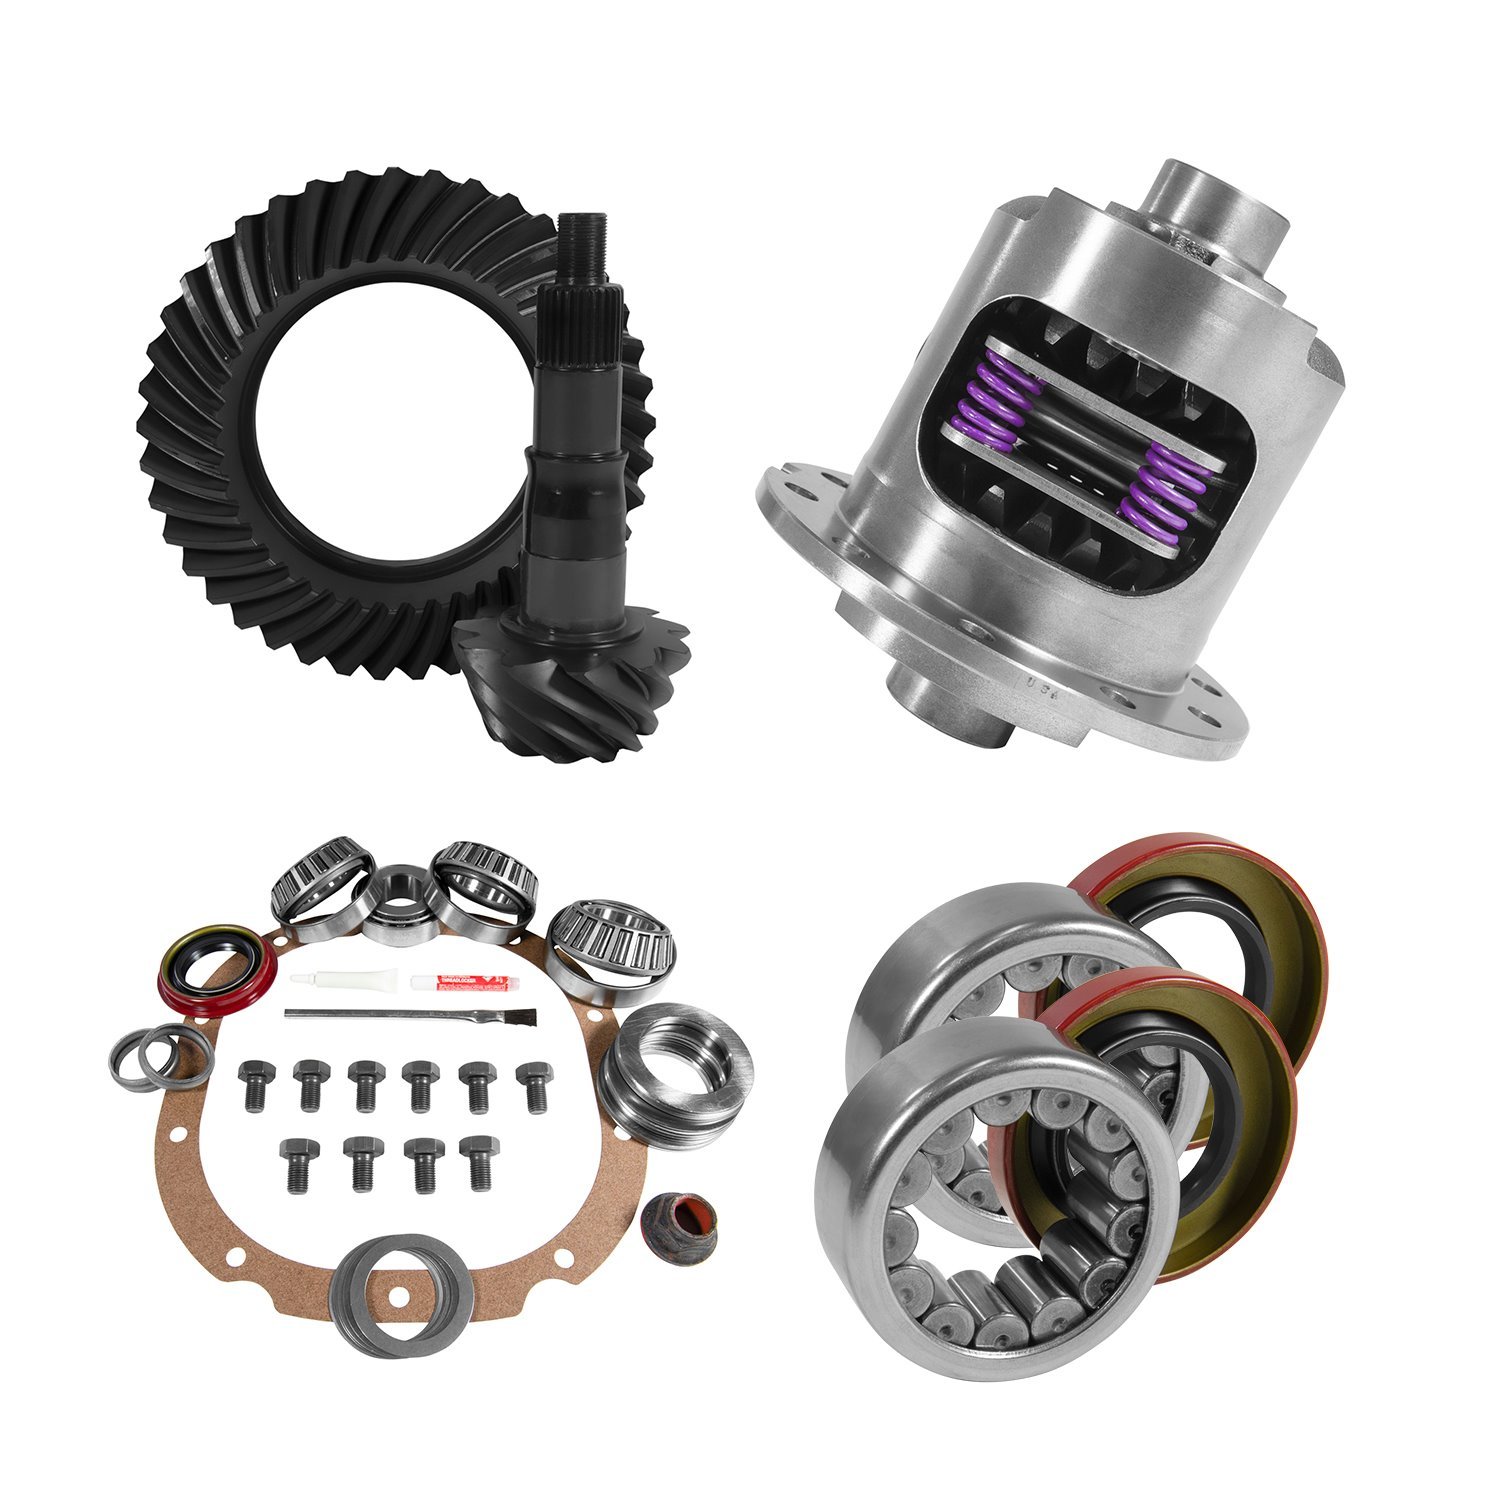 8.8 in. Ford 4.56 Rear Ring & Pinion, Install Kit, 31Spl Posi, 2.99 in. Axle Bearings